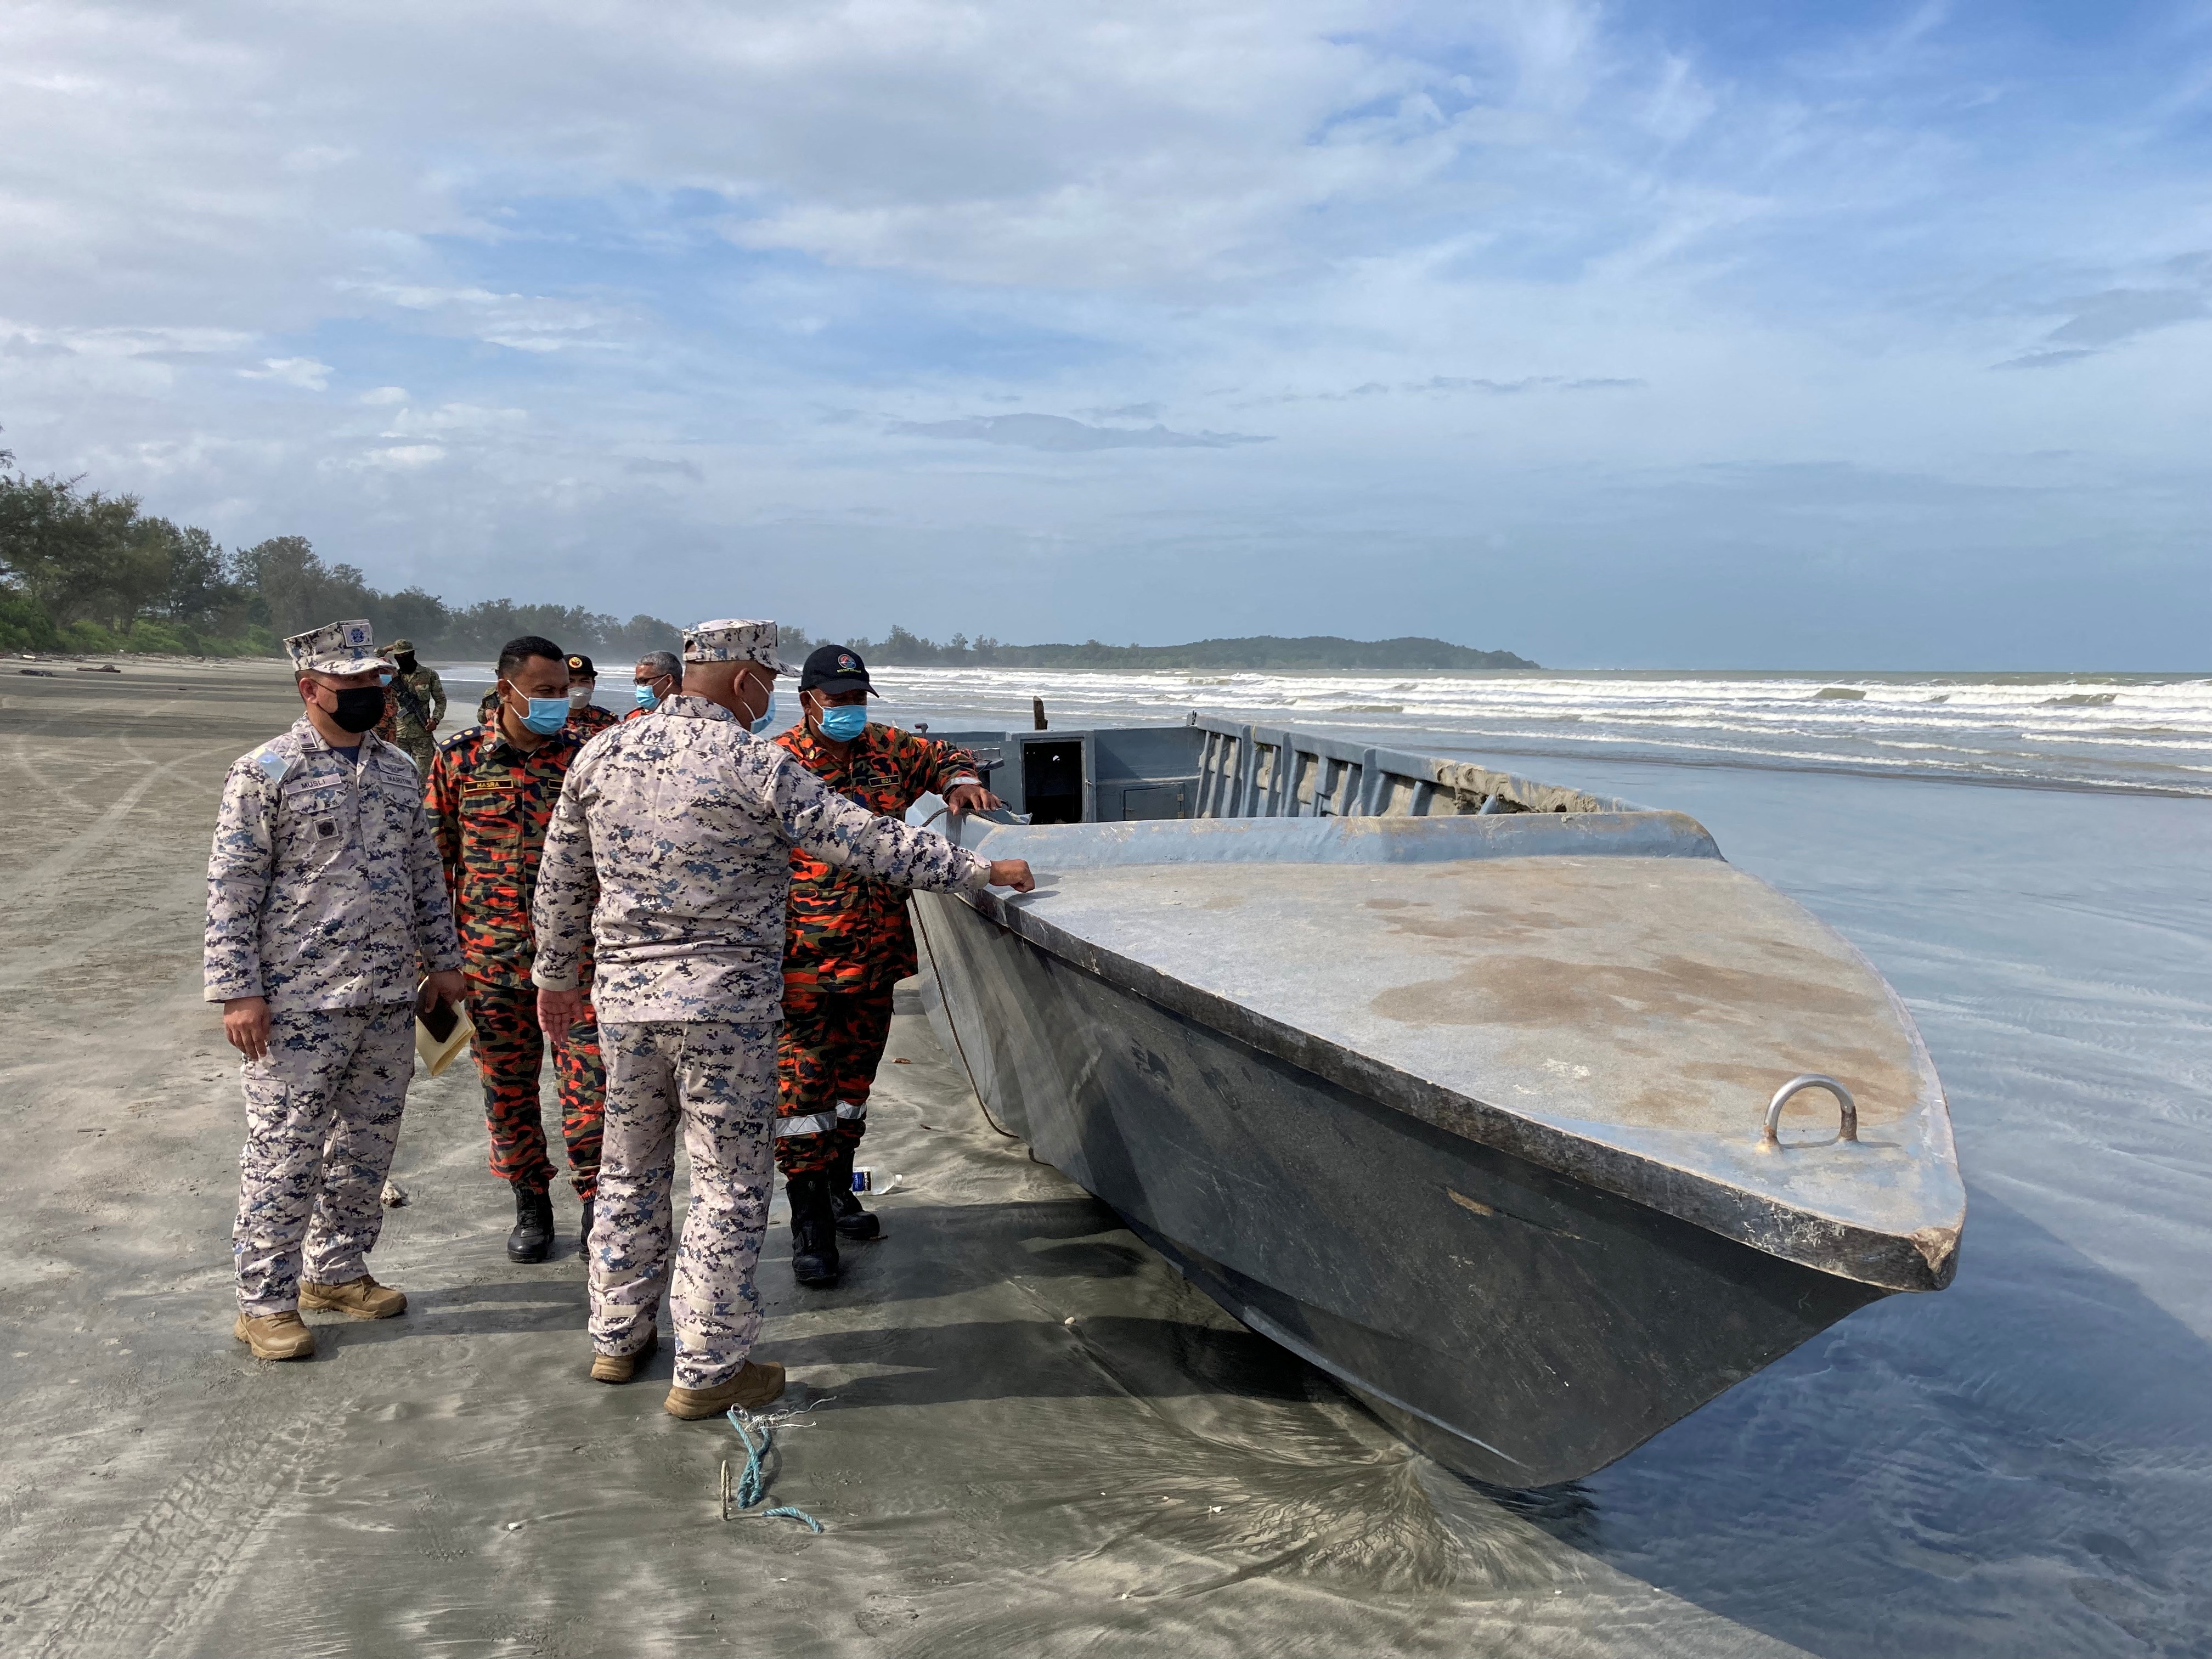 Officials inspect a boat that capsized killing some of the people onboard while others remain missing in Kota Tinggi, Malaysia